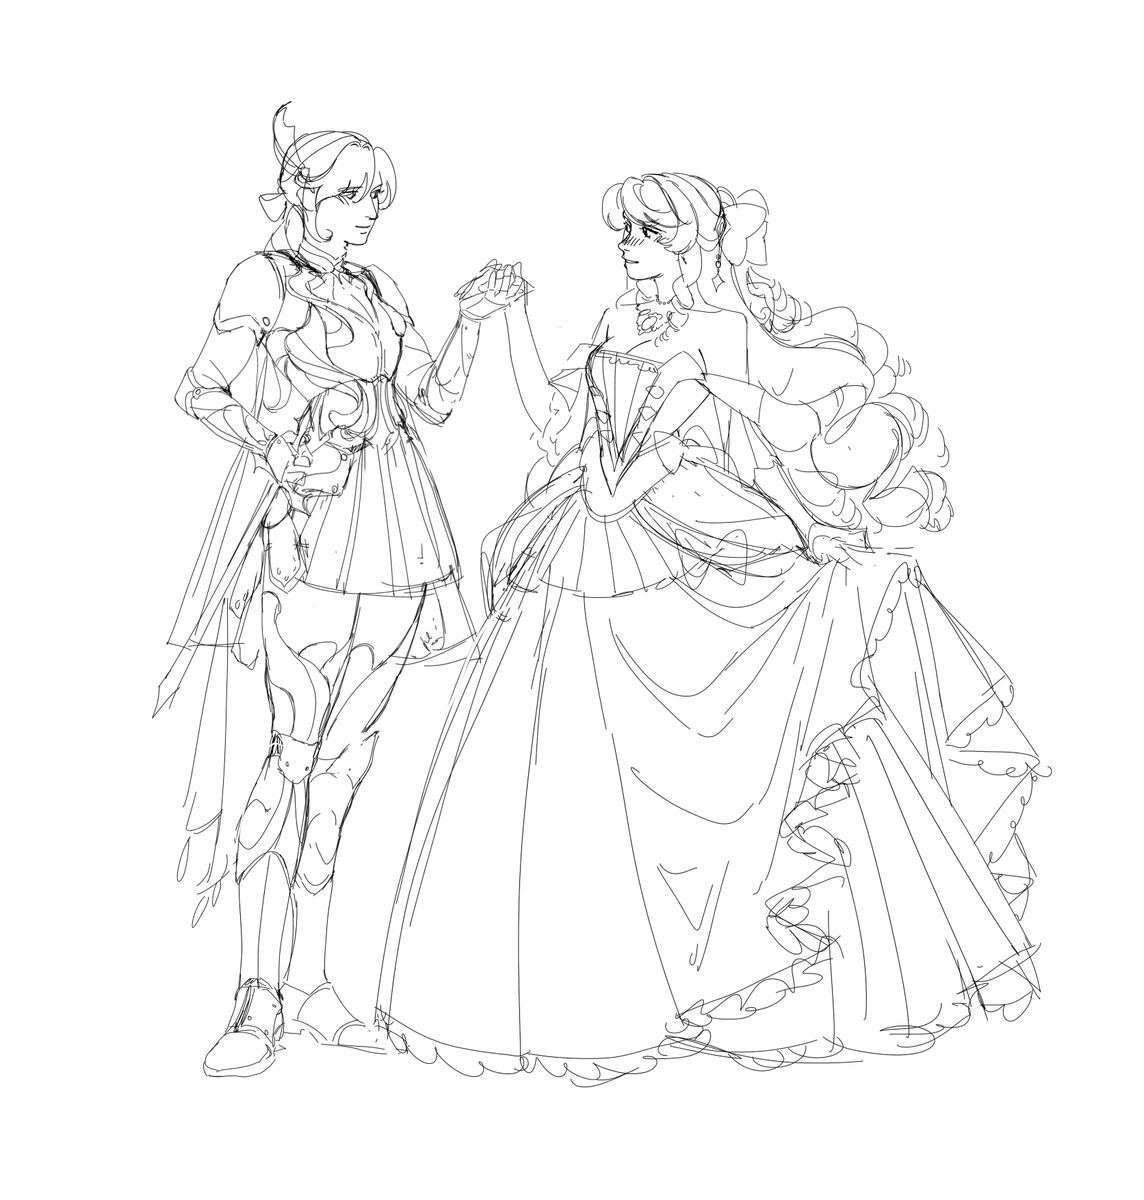 i have been thinking about knight Clorinde and princess Navia nonstop i need them to get out of my head